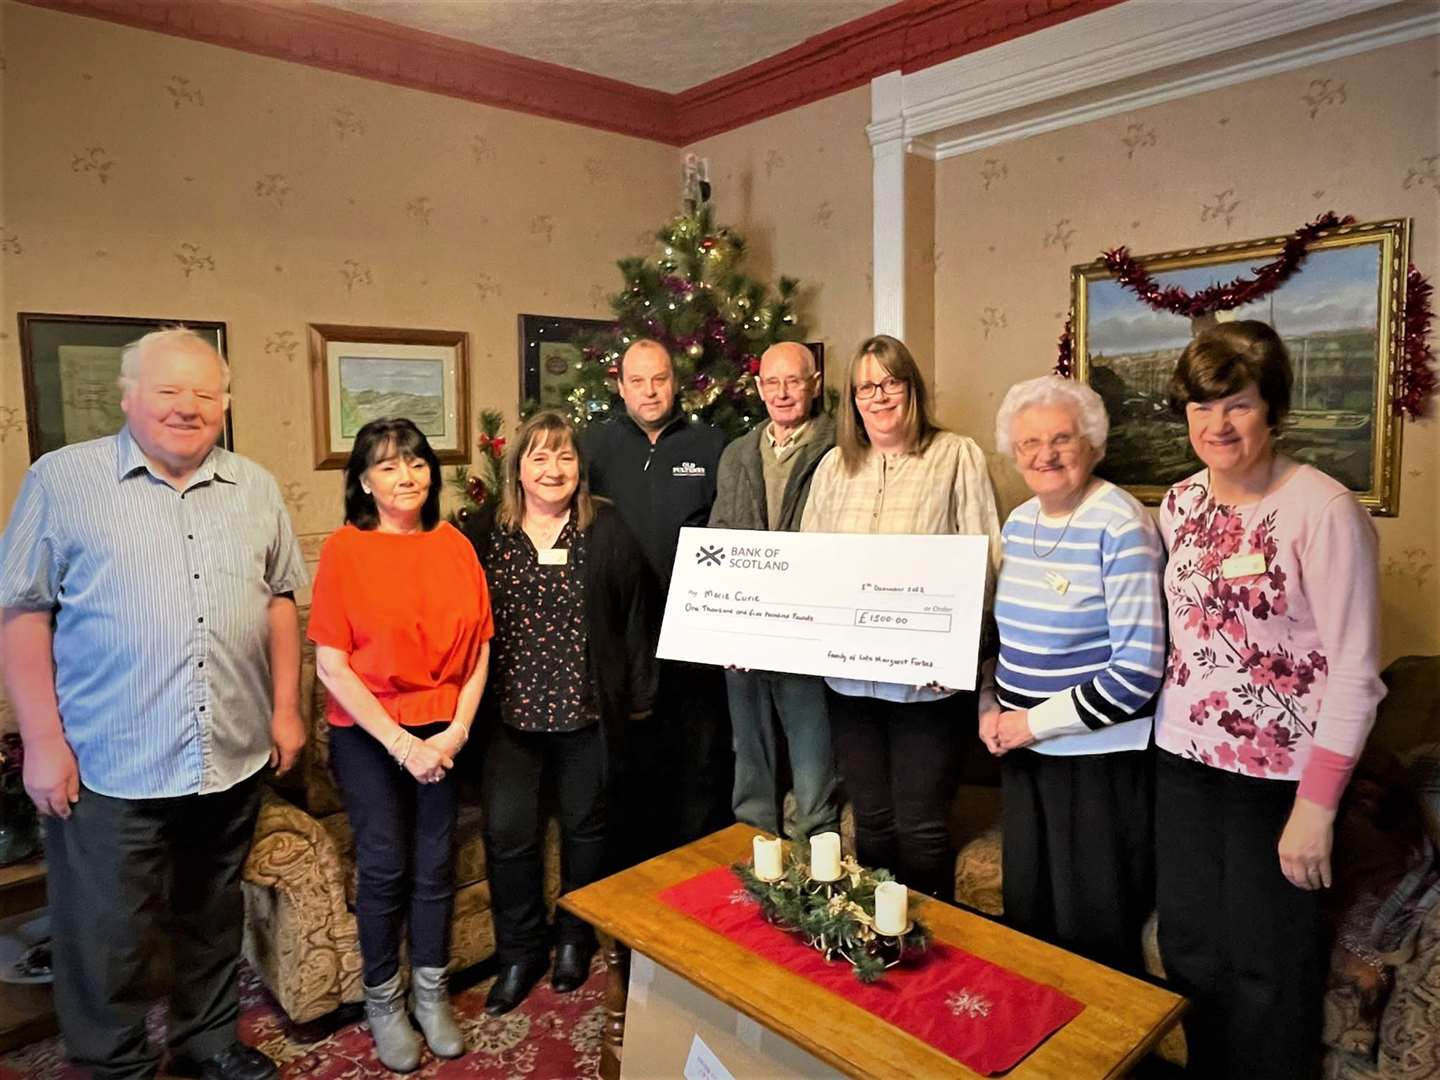 Handing over the cheque (from left to right) Bruce Simpson, Janette Mackenzie (treasurer, Marie Curie Wick Fundraising Group), Ann Sargent (chairperson), Kenneth Forbes, David Forbes, Alison Duncan, Lottie Shearer (committe member), Barbara Nicol (secretary).